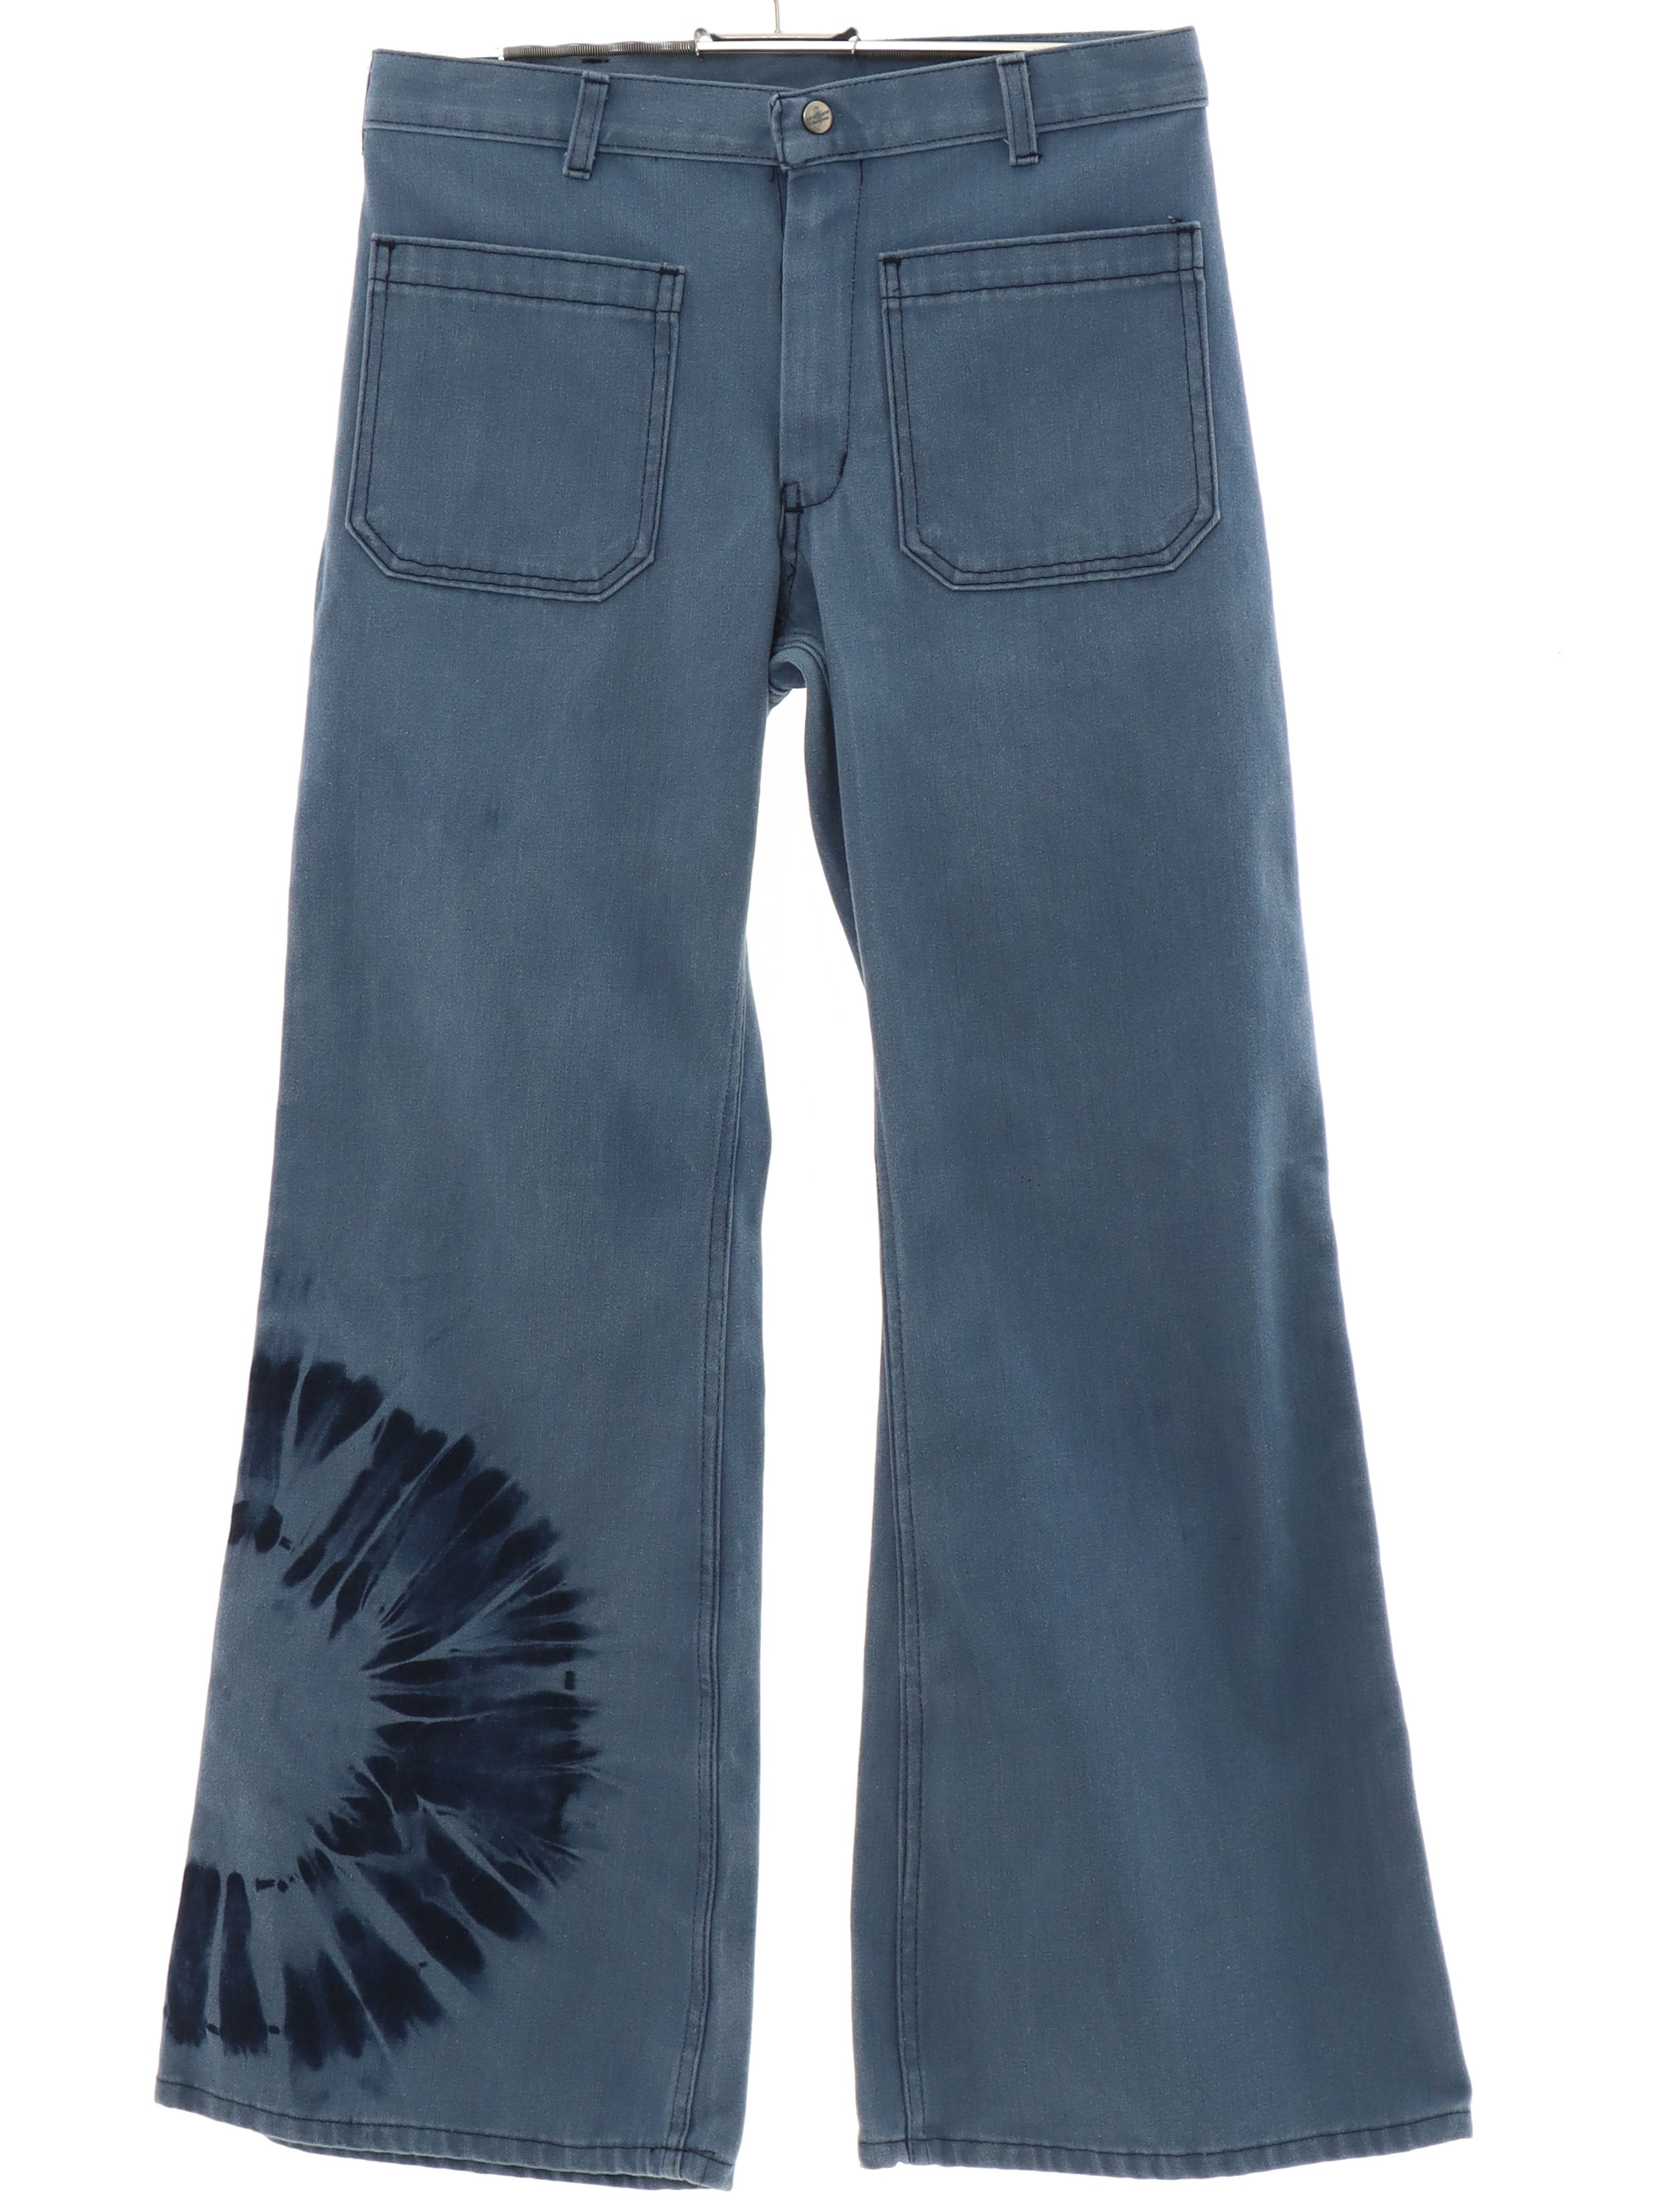 Retro 70's Bellbottom Pants: 70s style -Seafarer- Unisex dusty blue cotton  polyester blend denim navy issue bellbottom jeans pants with cuffless hem,  two front patch pockets, two rear patch pockets (one has